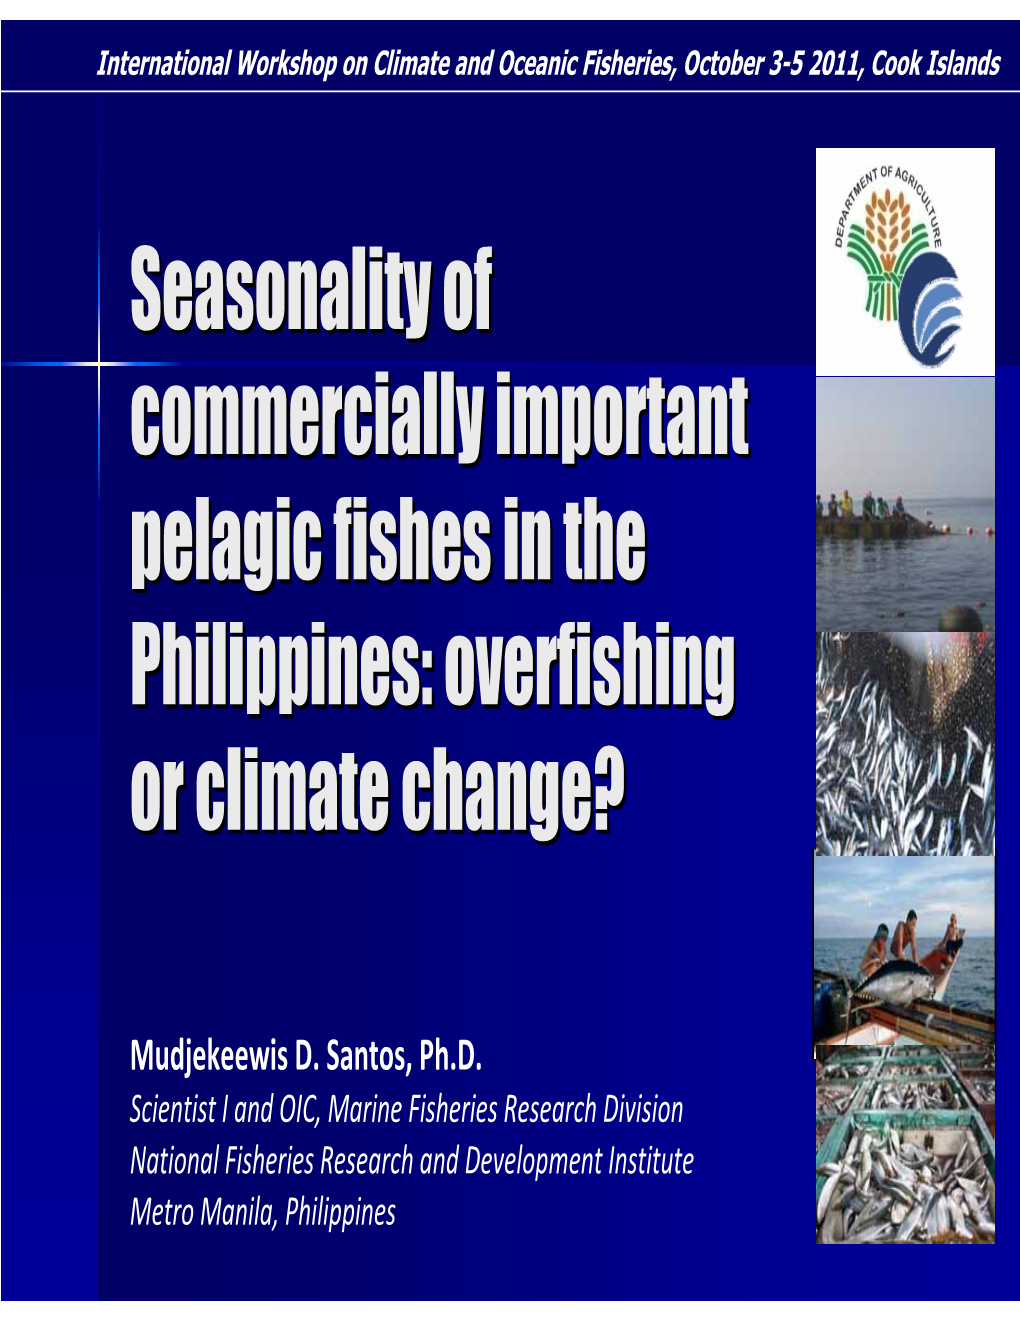 Seasonality of Commercially Important Pelagic Fishes in the Philippines